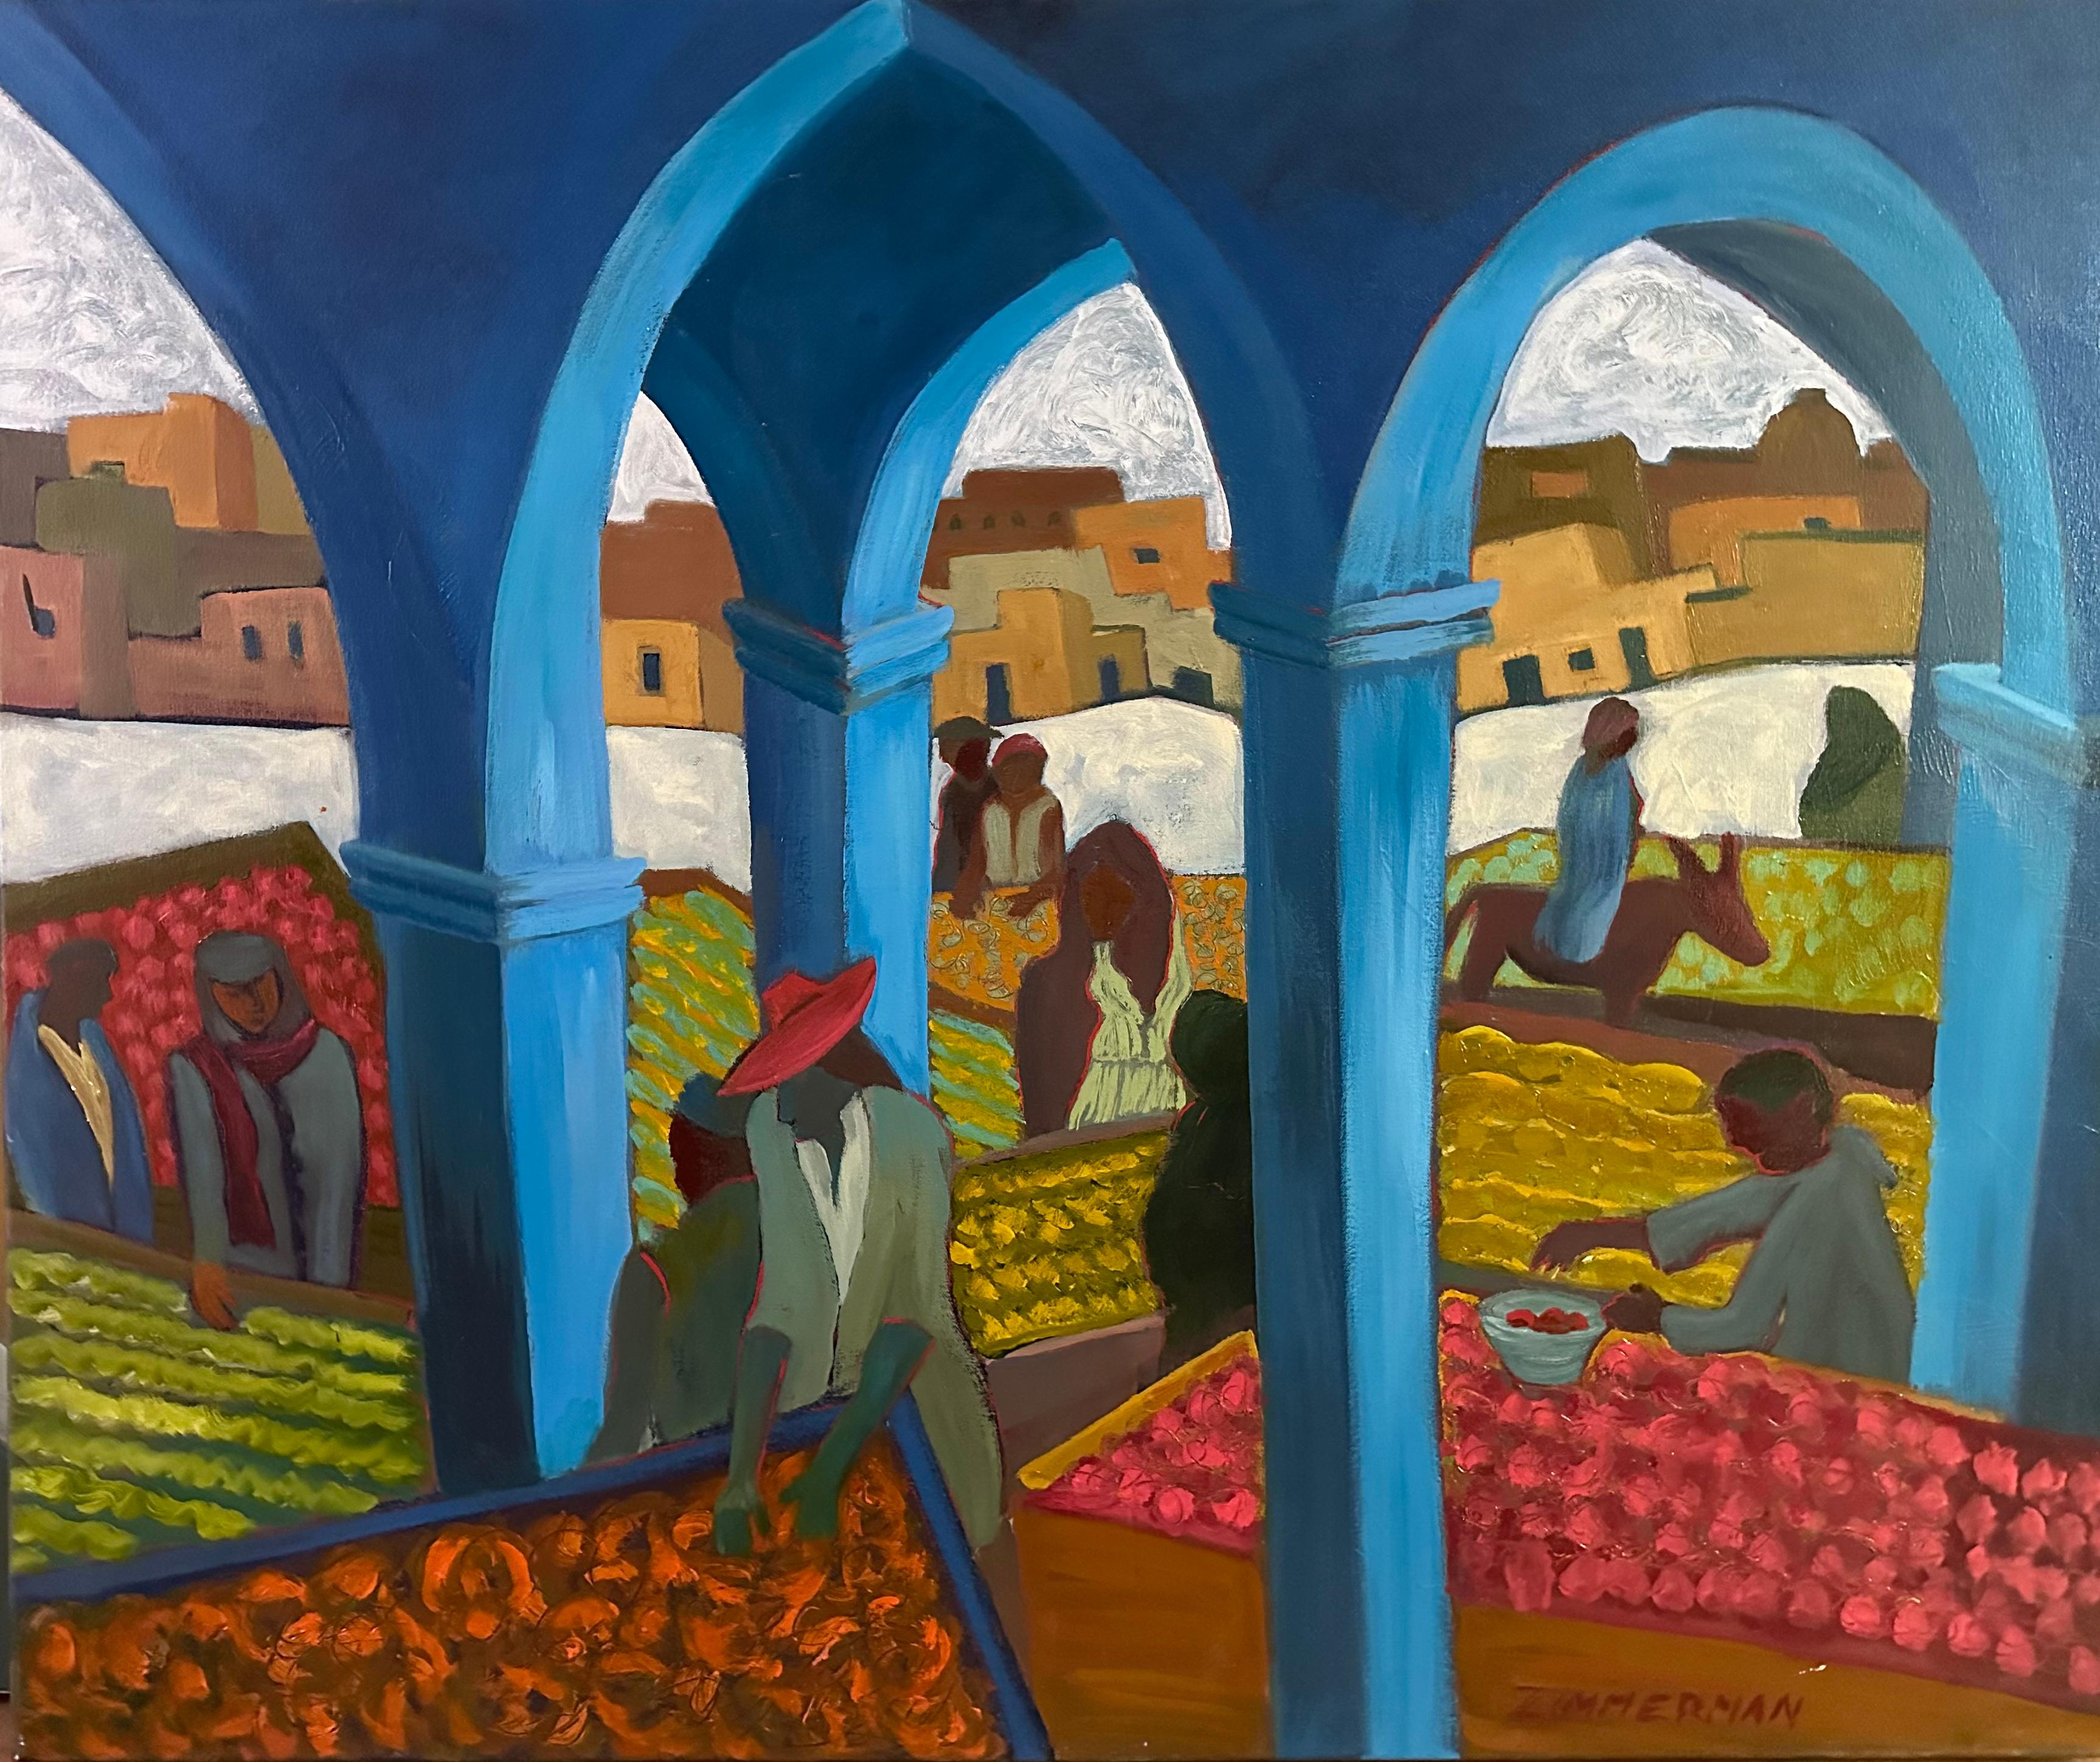 The universal farmers market is bustling with action. Geometric stalls with intense color coupled with contrasting blue arches creates the dynamism in this work of art.

The Market #2 - Figurative Painting - American Modern Art By Marc